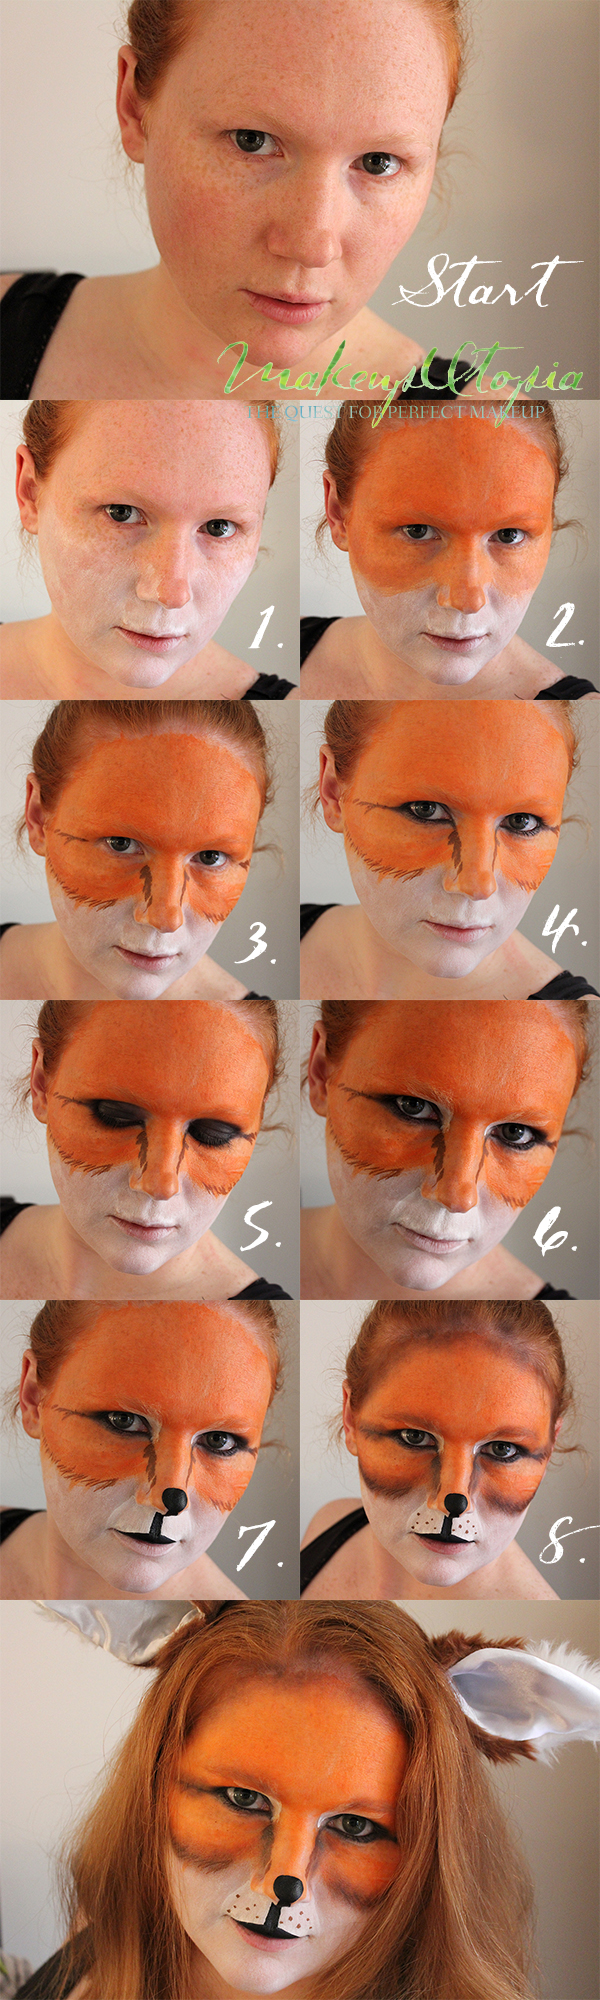 15 Halloween Makeup Tutorials to Scare You Out of Your Skin